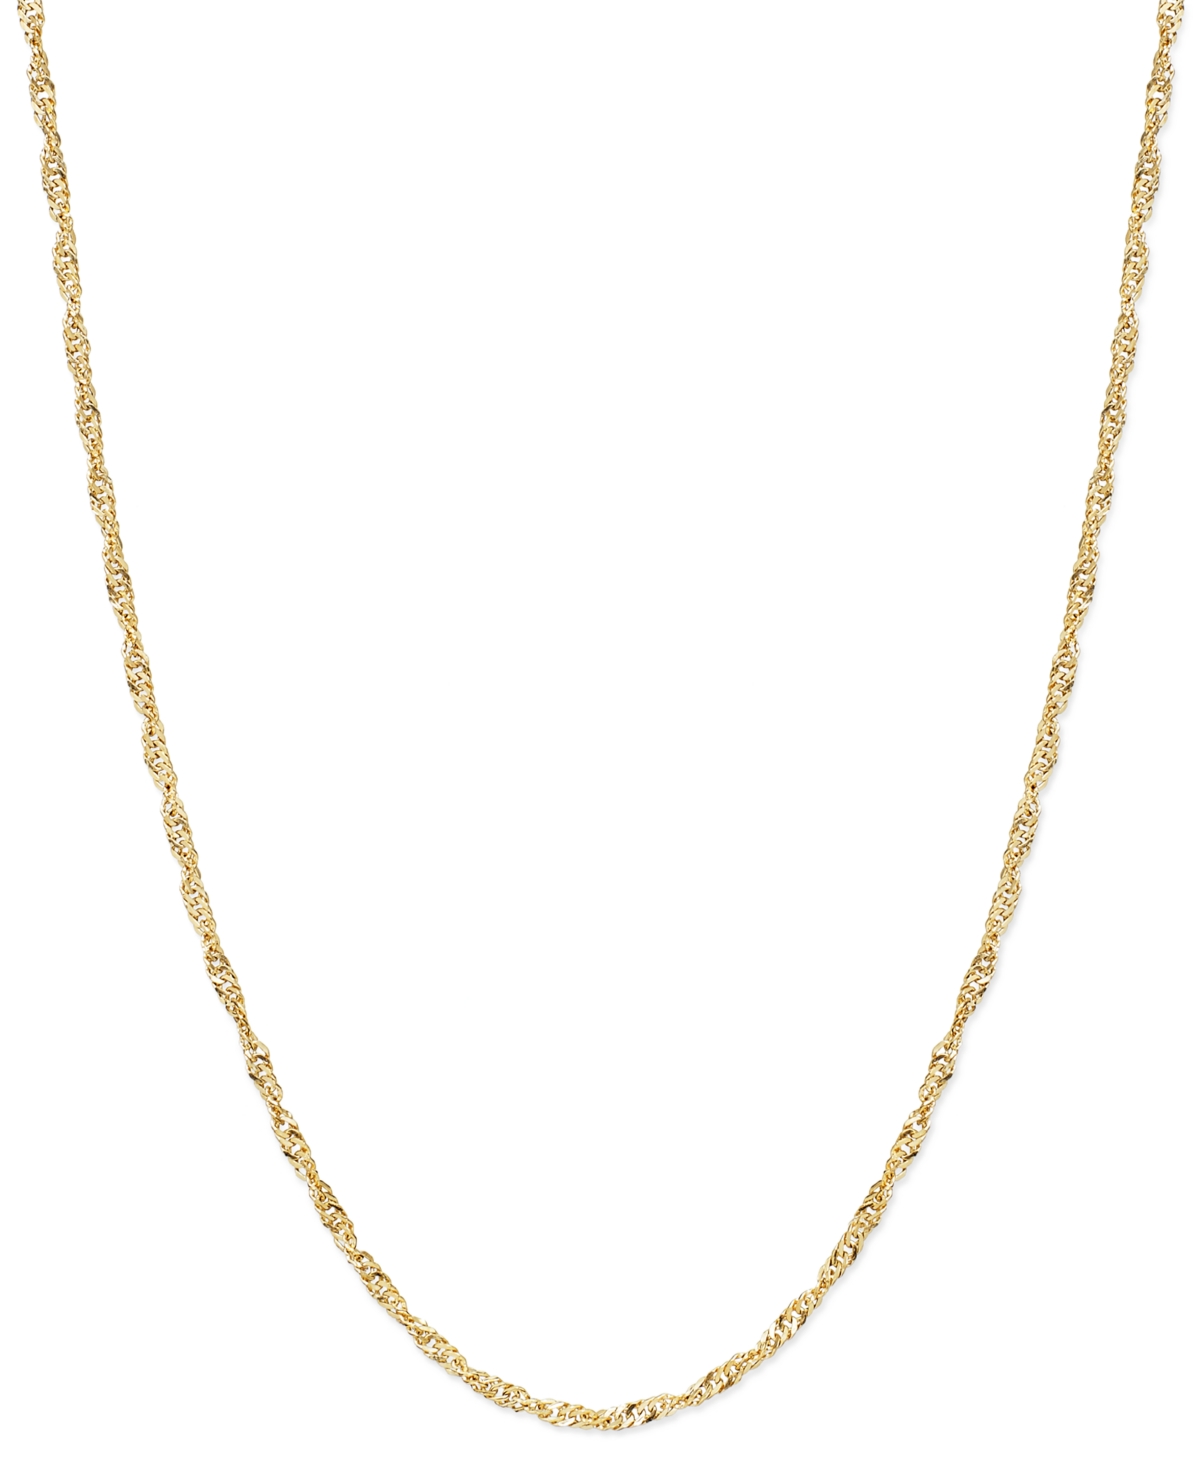 18" Singapore Chain Necklace (1-1/2mm) in 14k Gold - Yellow Gold